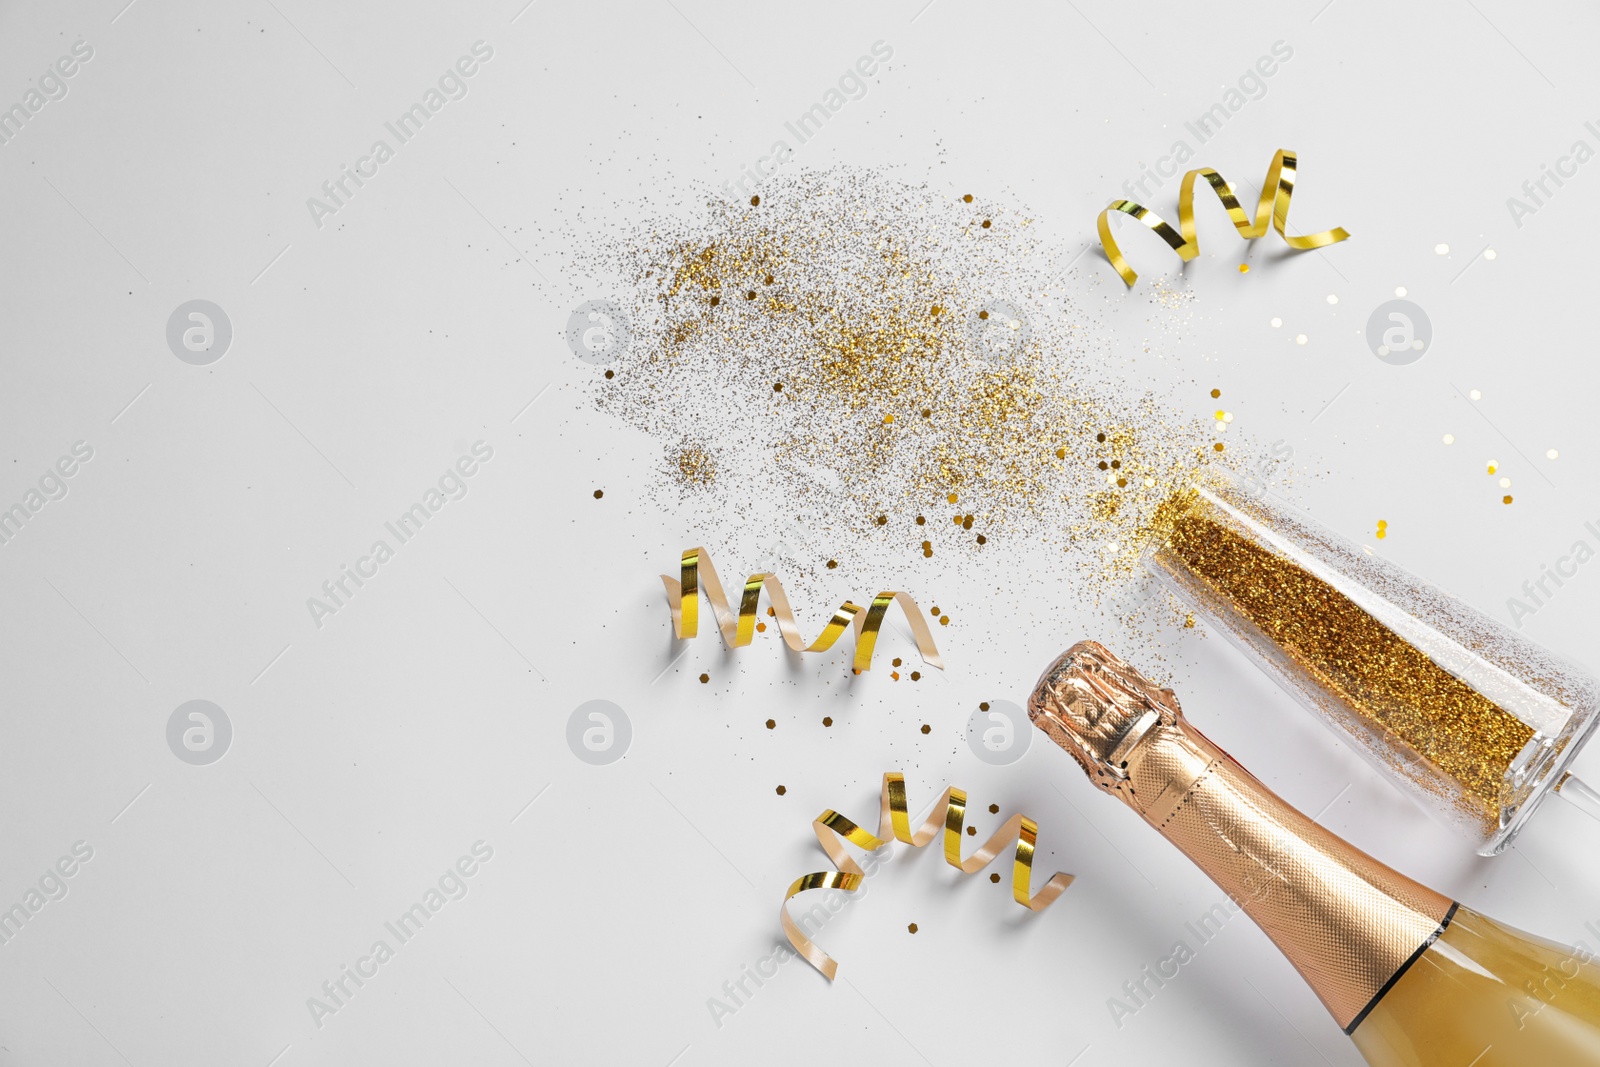 Photo of Bottle of champagne, glass with gold glitter and space for text on white background, top view. Hilarious celebration